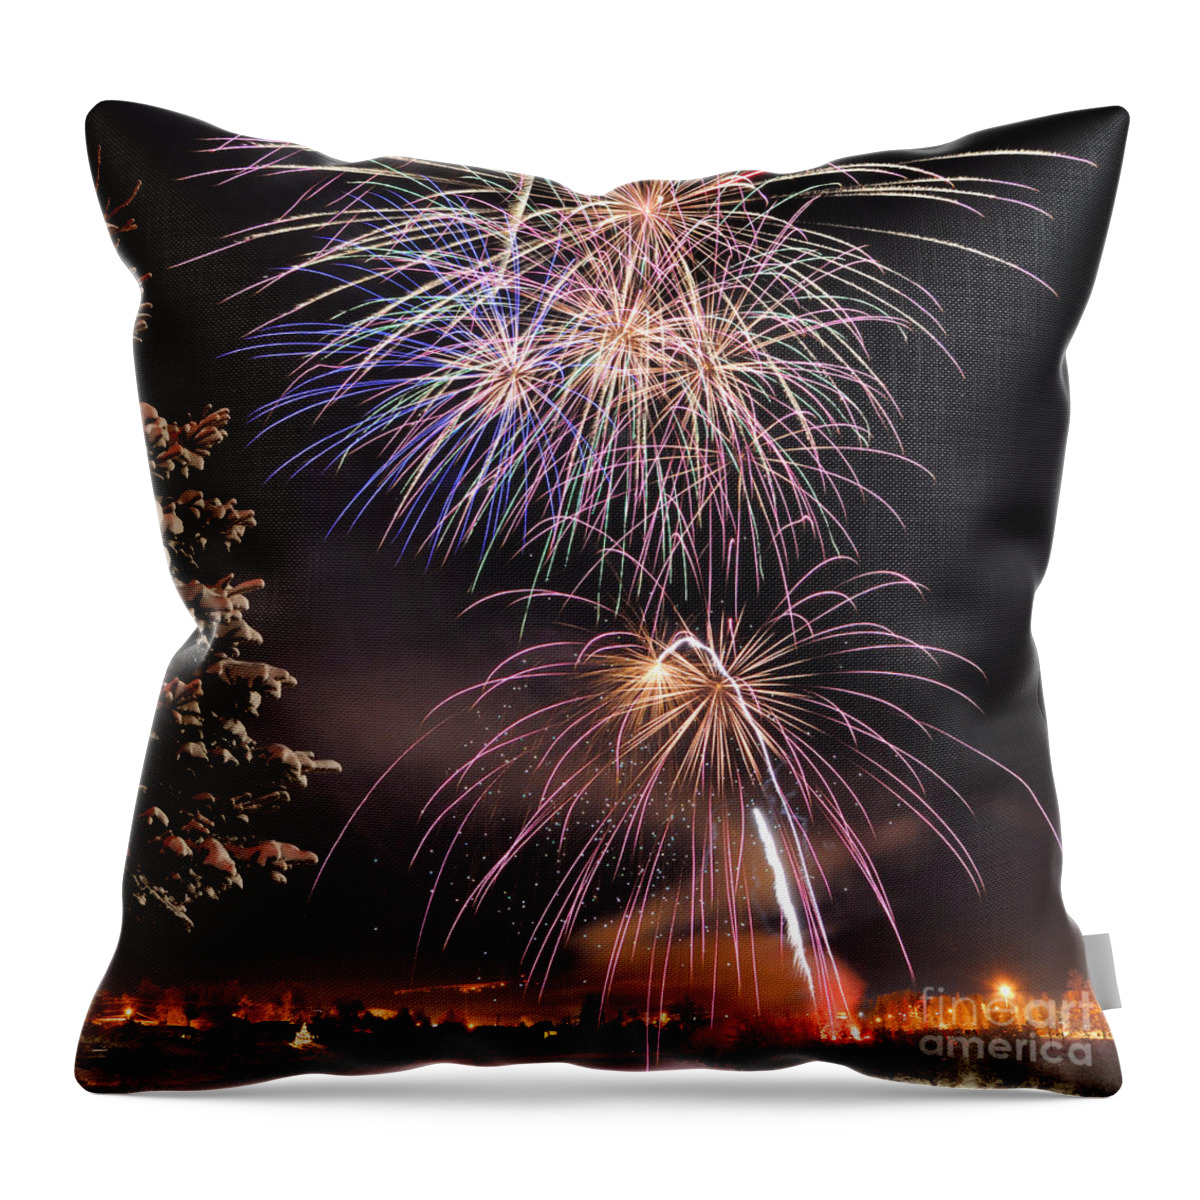 Fireworks Throw Pillow featuring the photograph Winter Solstice Fireworks by Gary Whitton